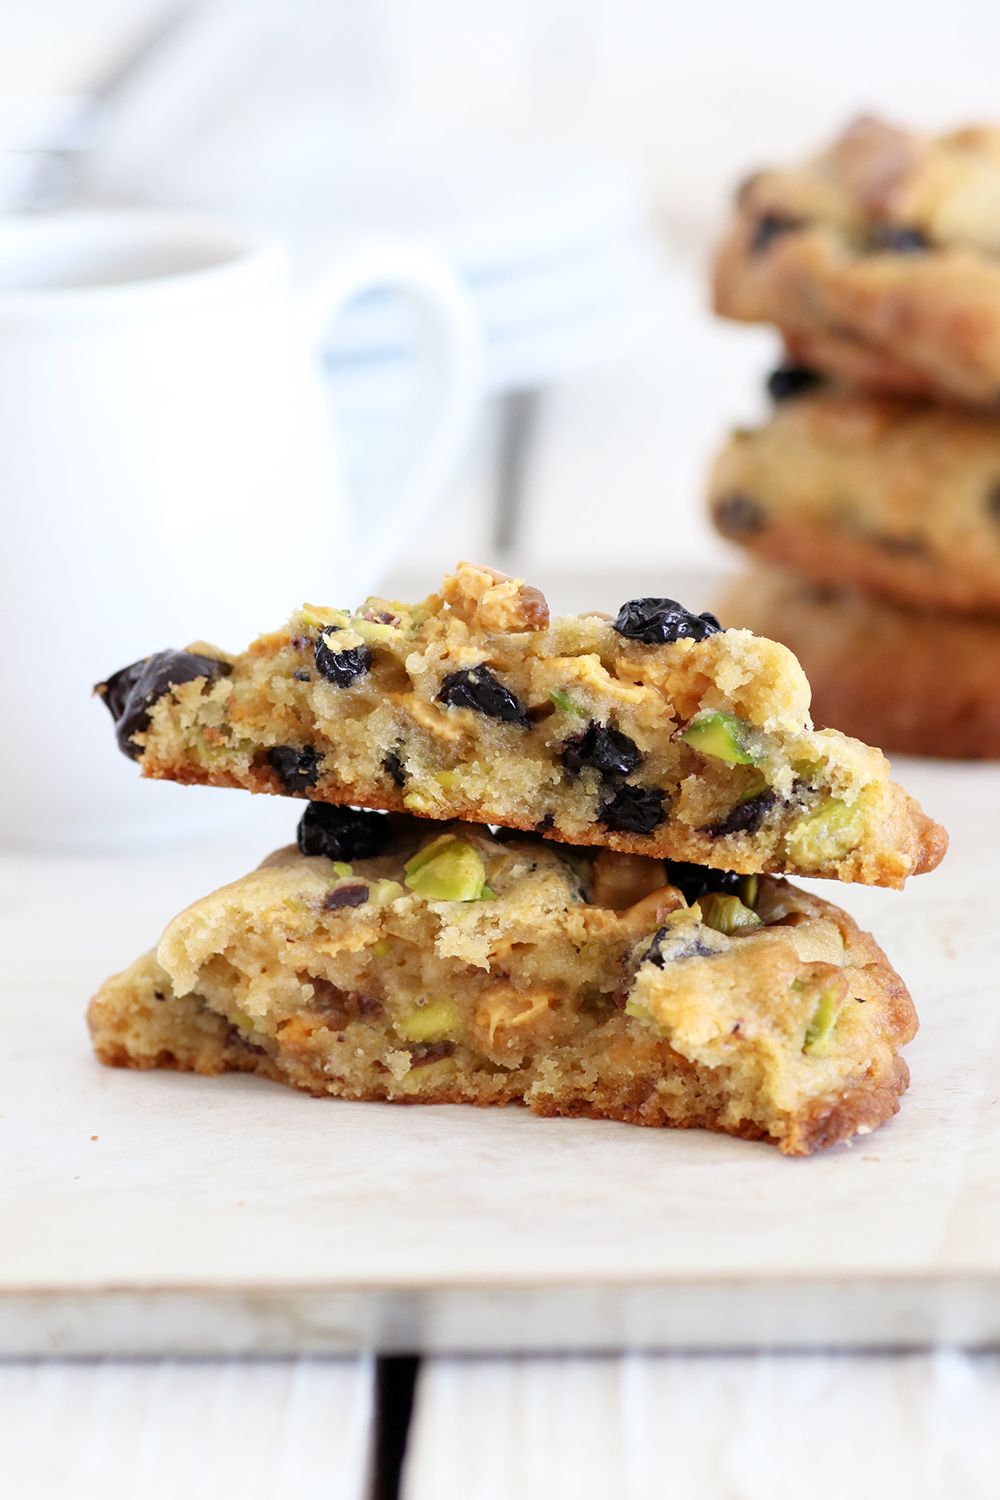 Caramelized White Chocolate Cookies with Pistachios and Blueberries